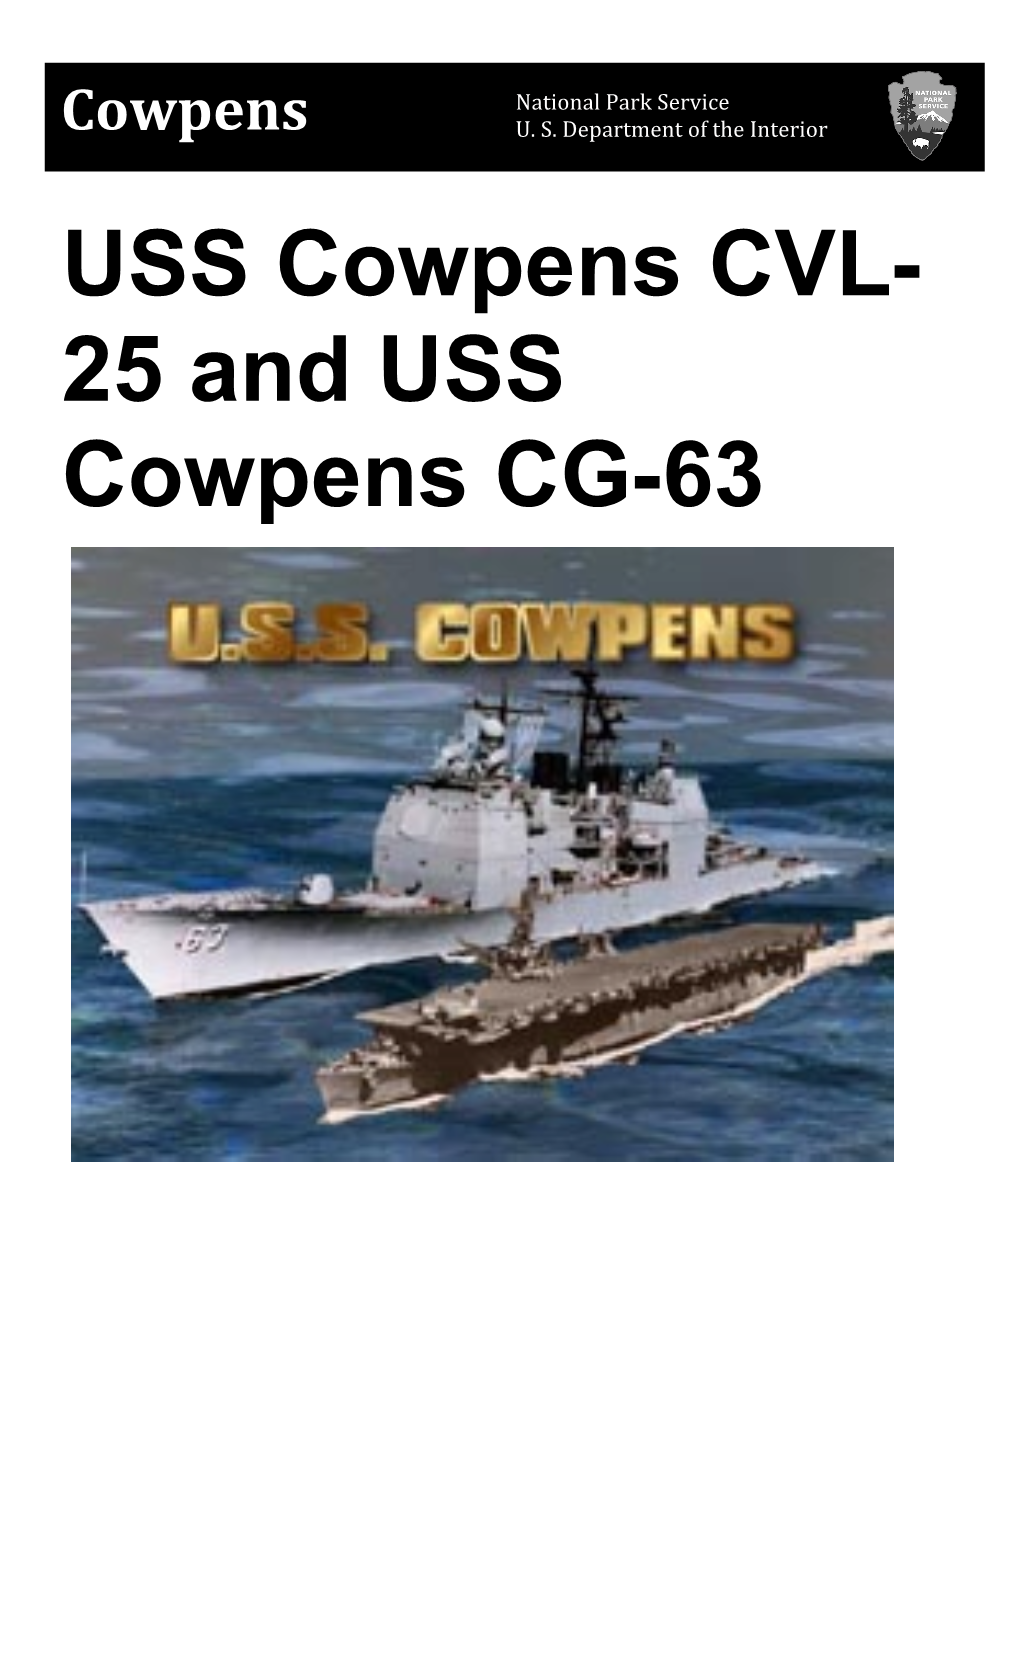 25 and USS Cowpens CG-63